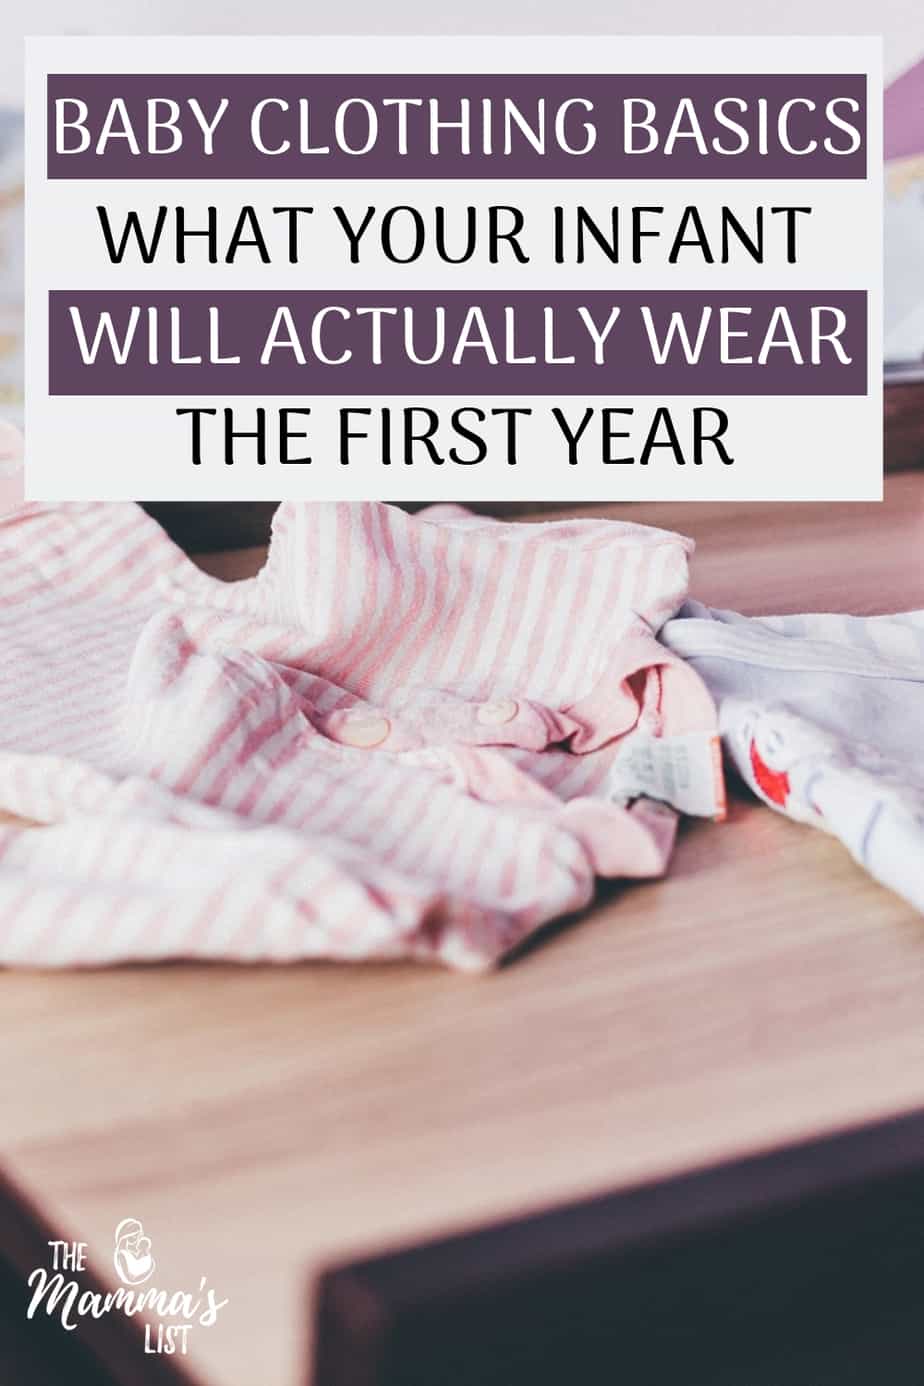 Find out what clothing your baby will actually wear the first year, and how much you'll need. Most of the items you get at your shower aren't going to be what your baby lives in! Check out the baby basics that you really want to put on your registry.